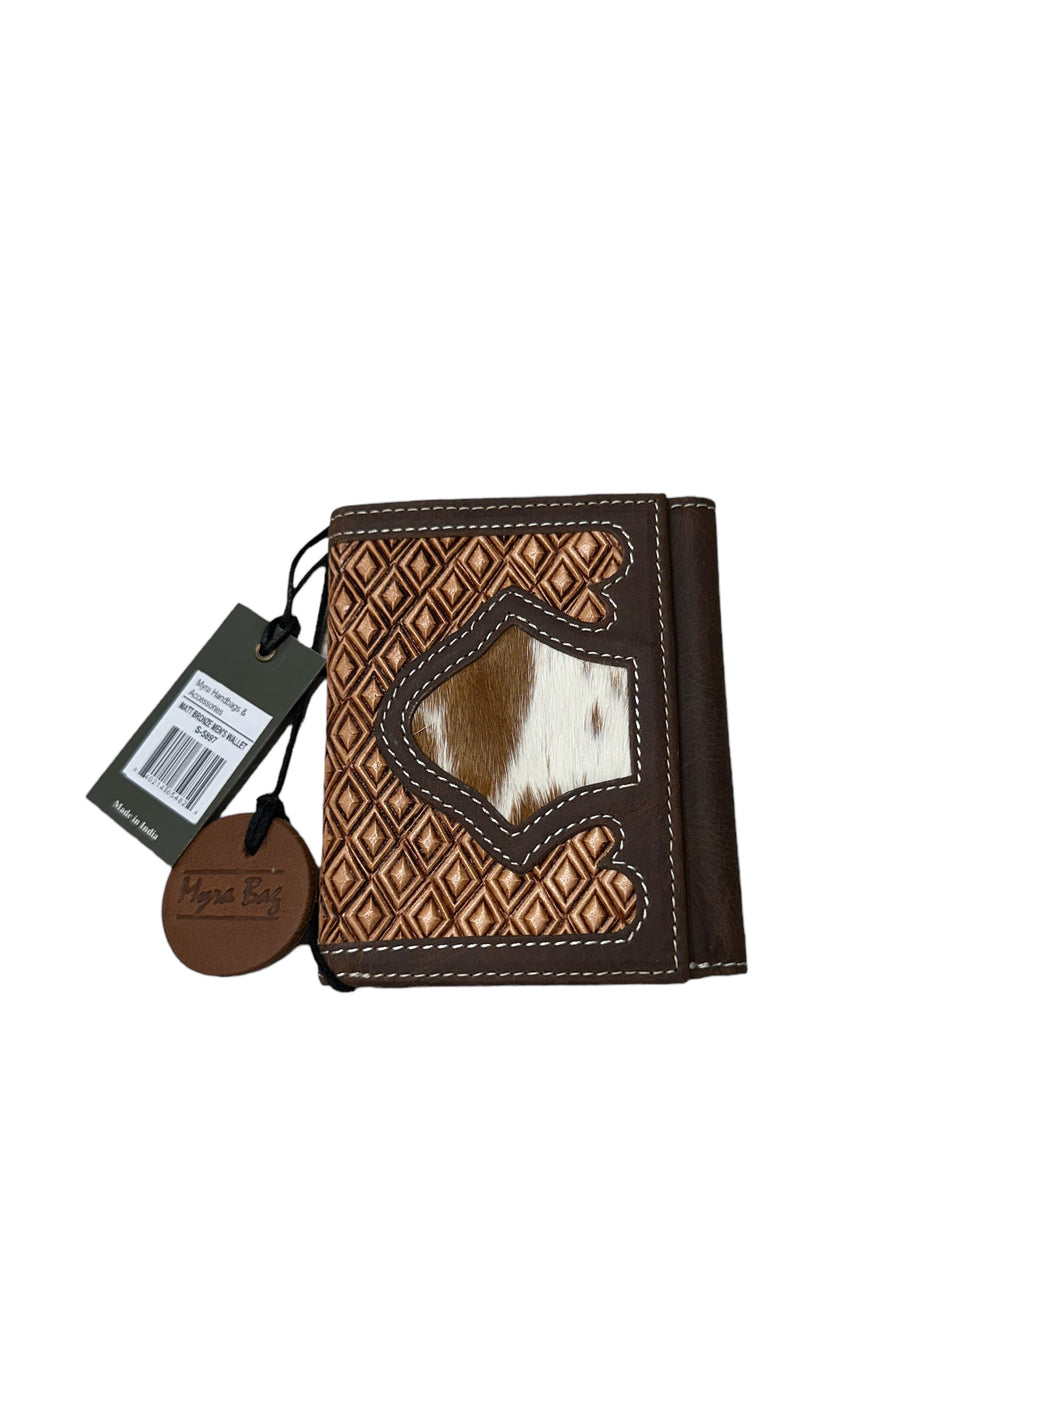 Men’s wallet brown leather with cowhide